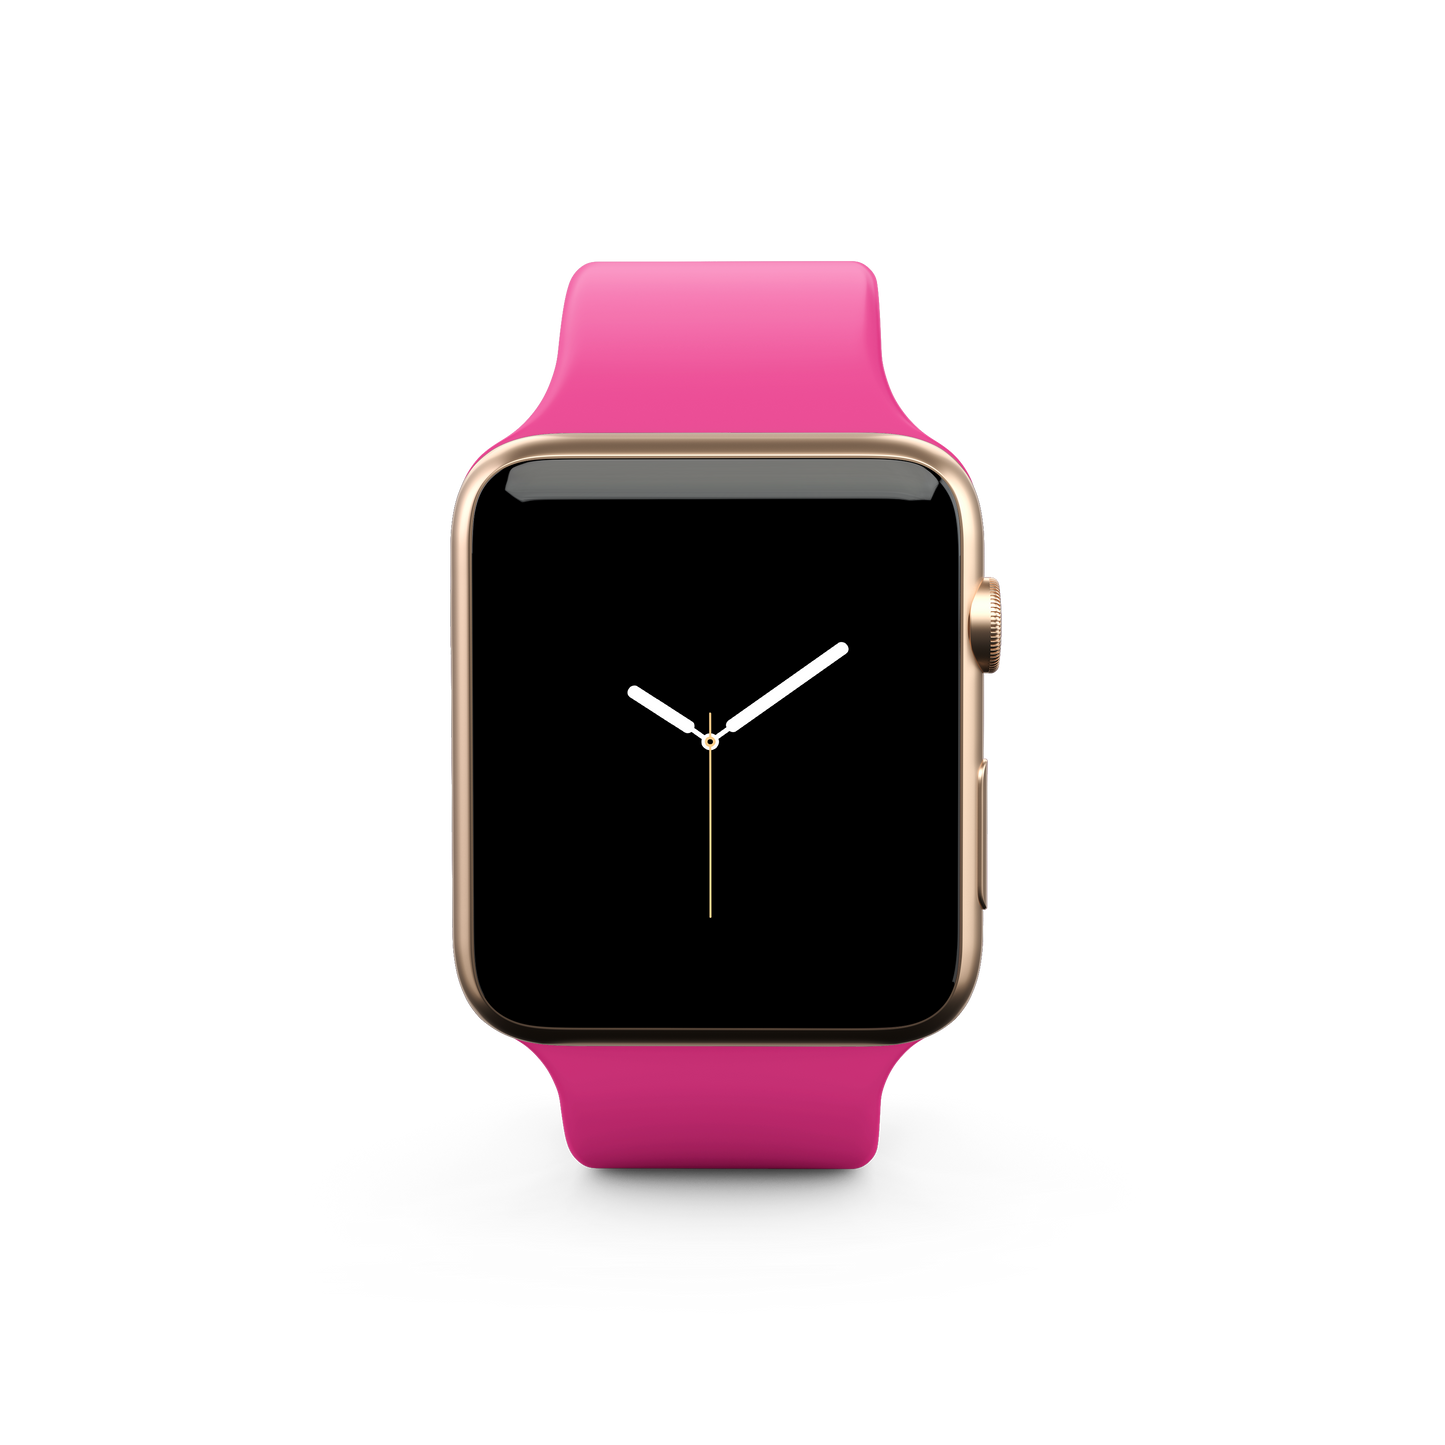 Barbie Pink Watch Band for Apple Watch by Joybands - Sleek & Versatile